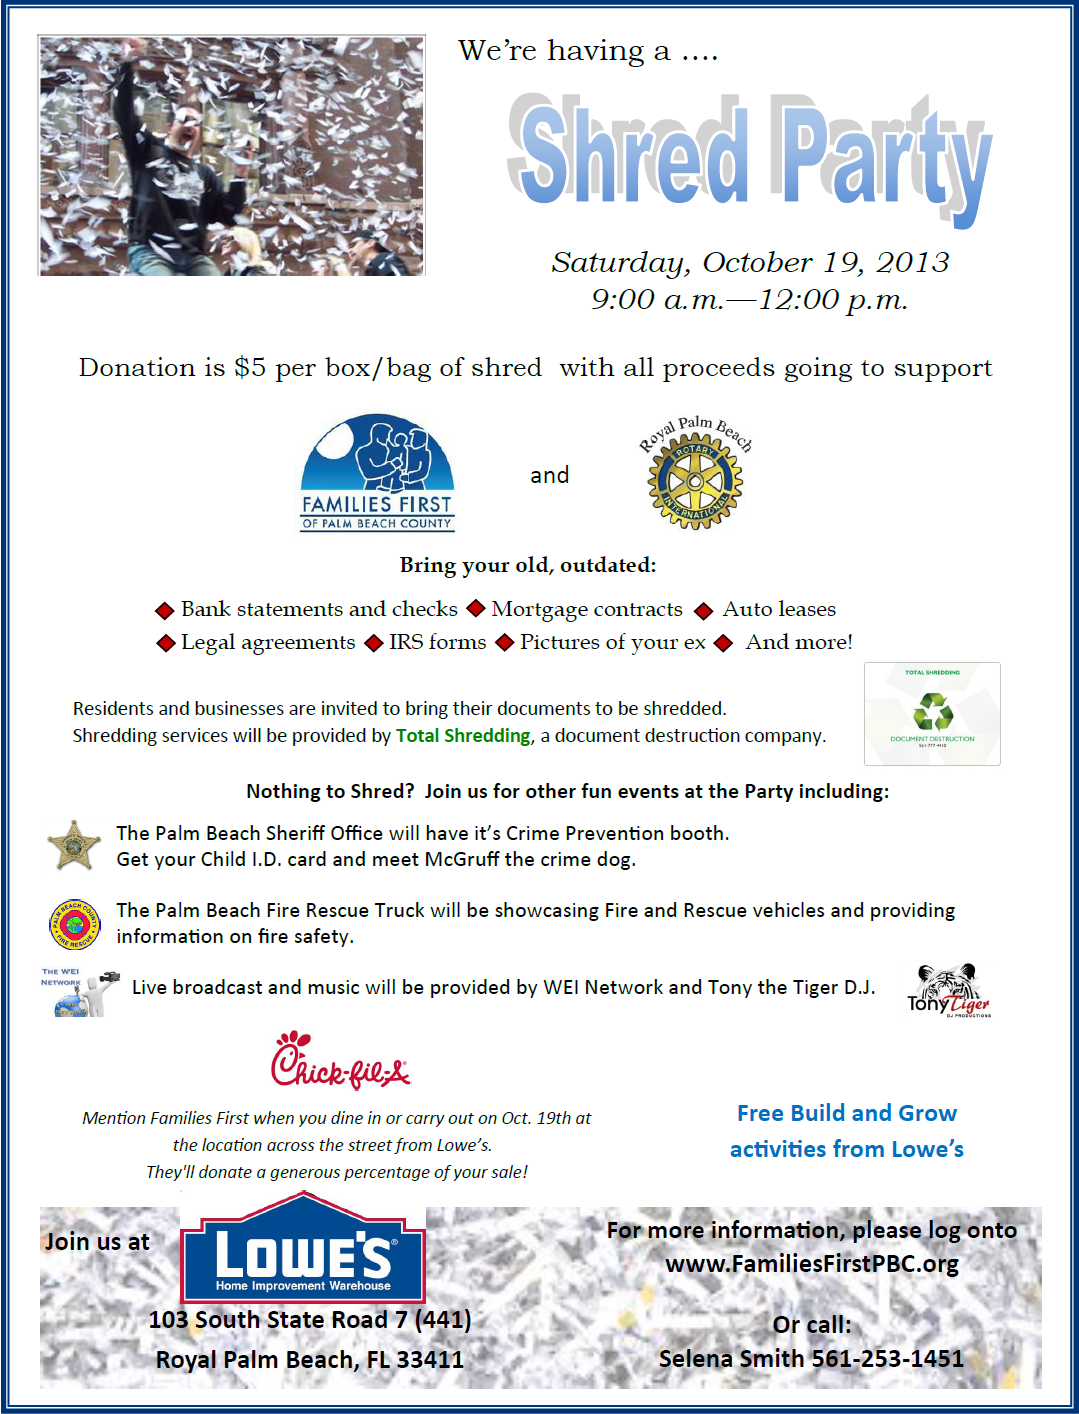 September, 2013 – Shred Party October 19 to Benefit Families First of Palm Beach County & Rotary International of Royal Palm Beach